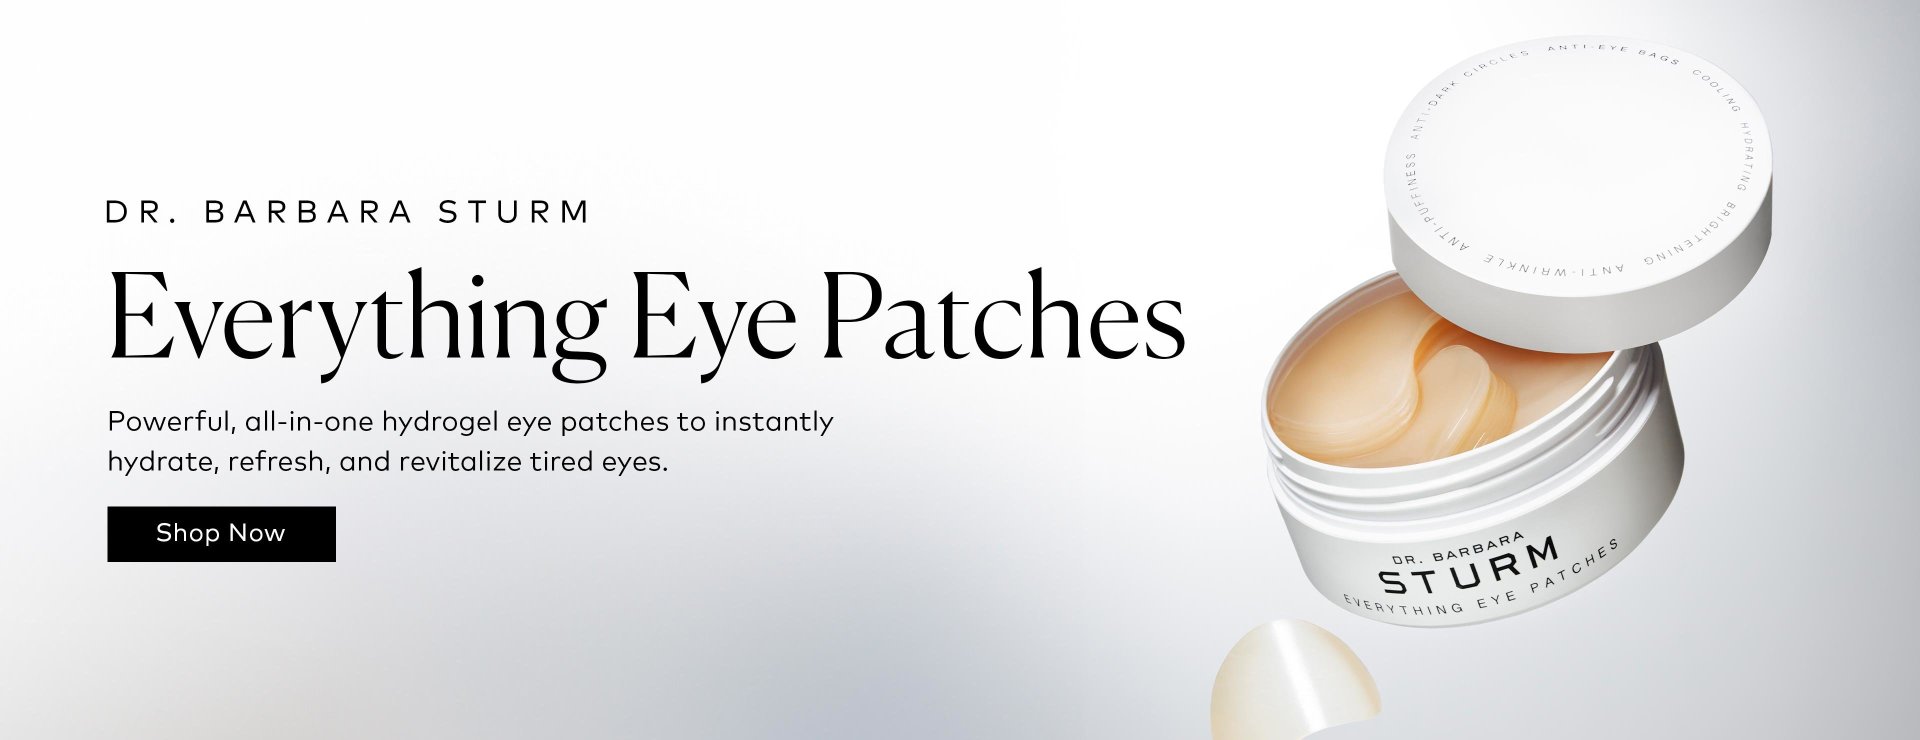 Shop the Dr. Barbara Sturm Everything Eye Patches at Beautylish.com